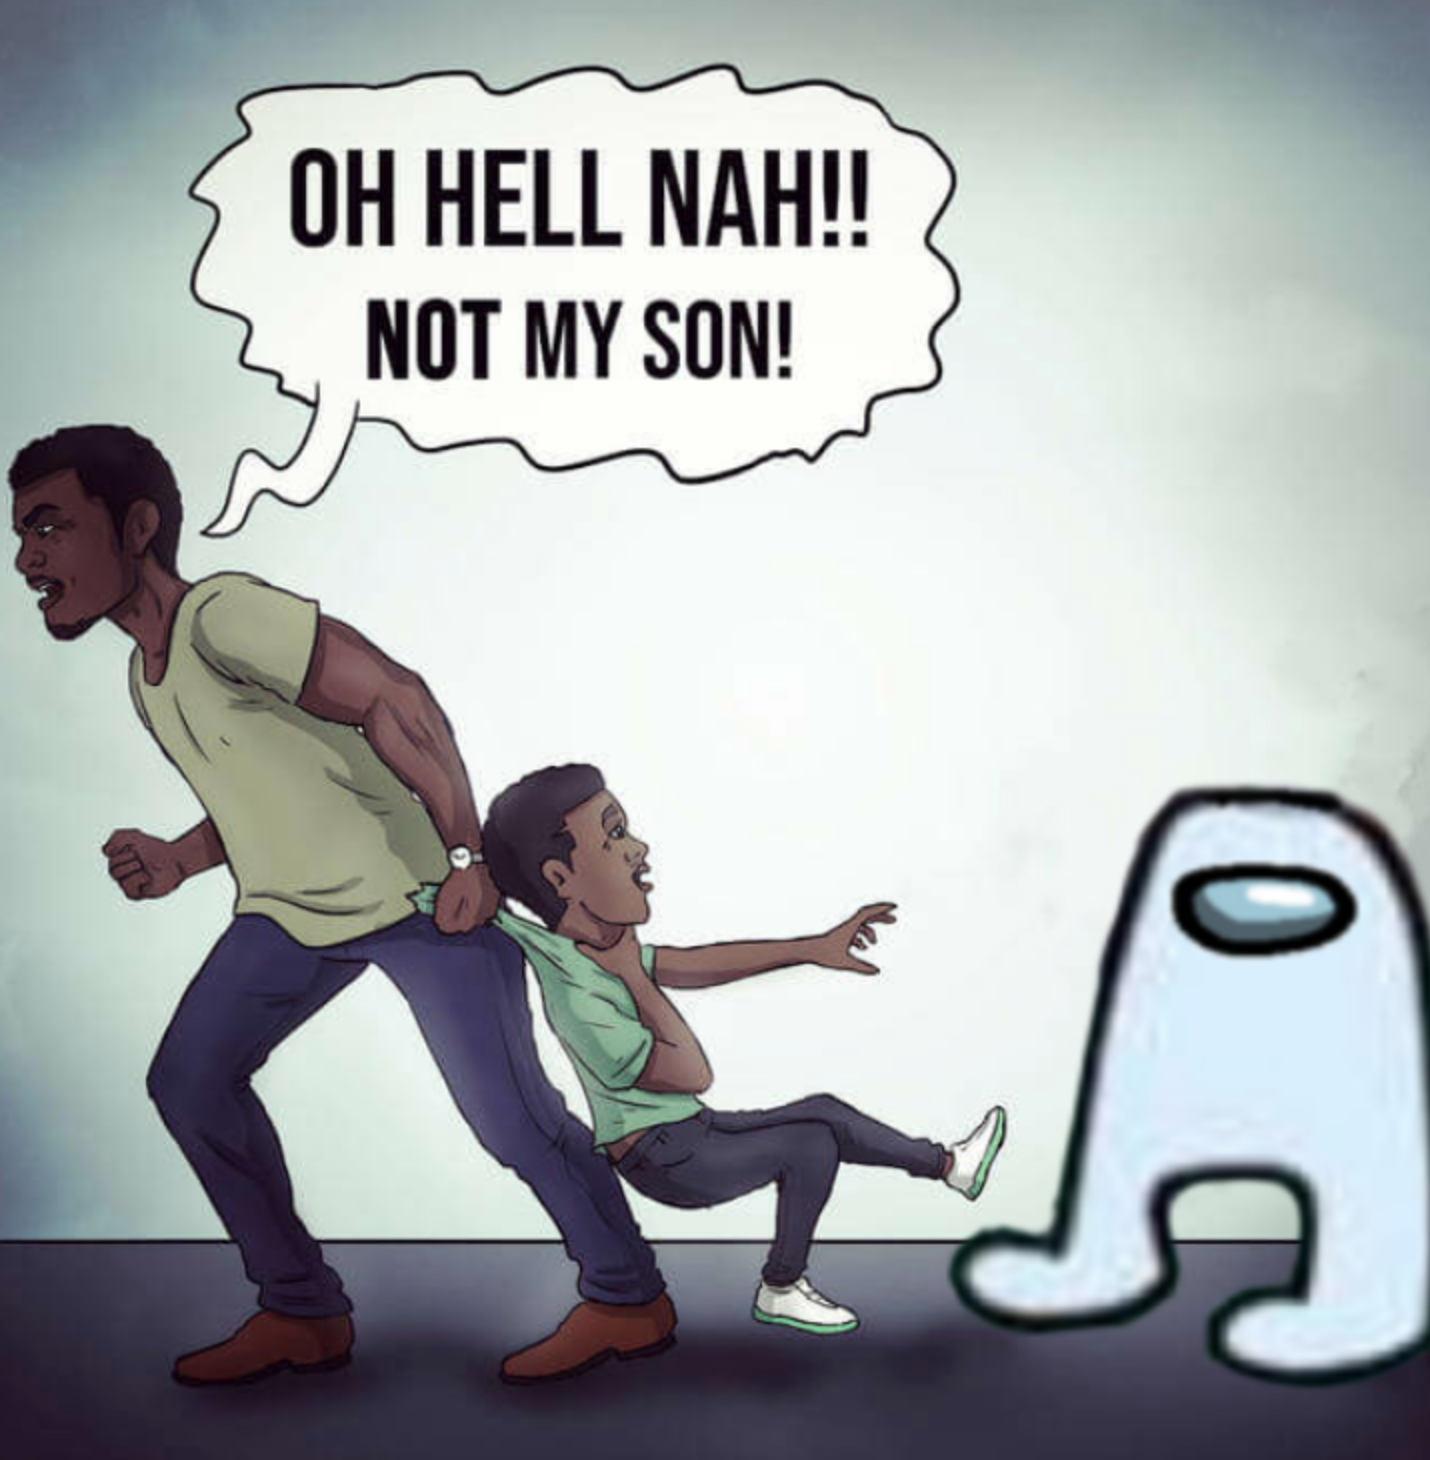 funny gaming memes - hell nah not my son meme template - Oh Hell Nah!! Not My Son! o